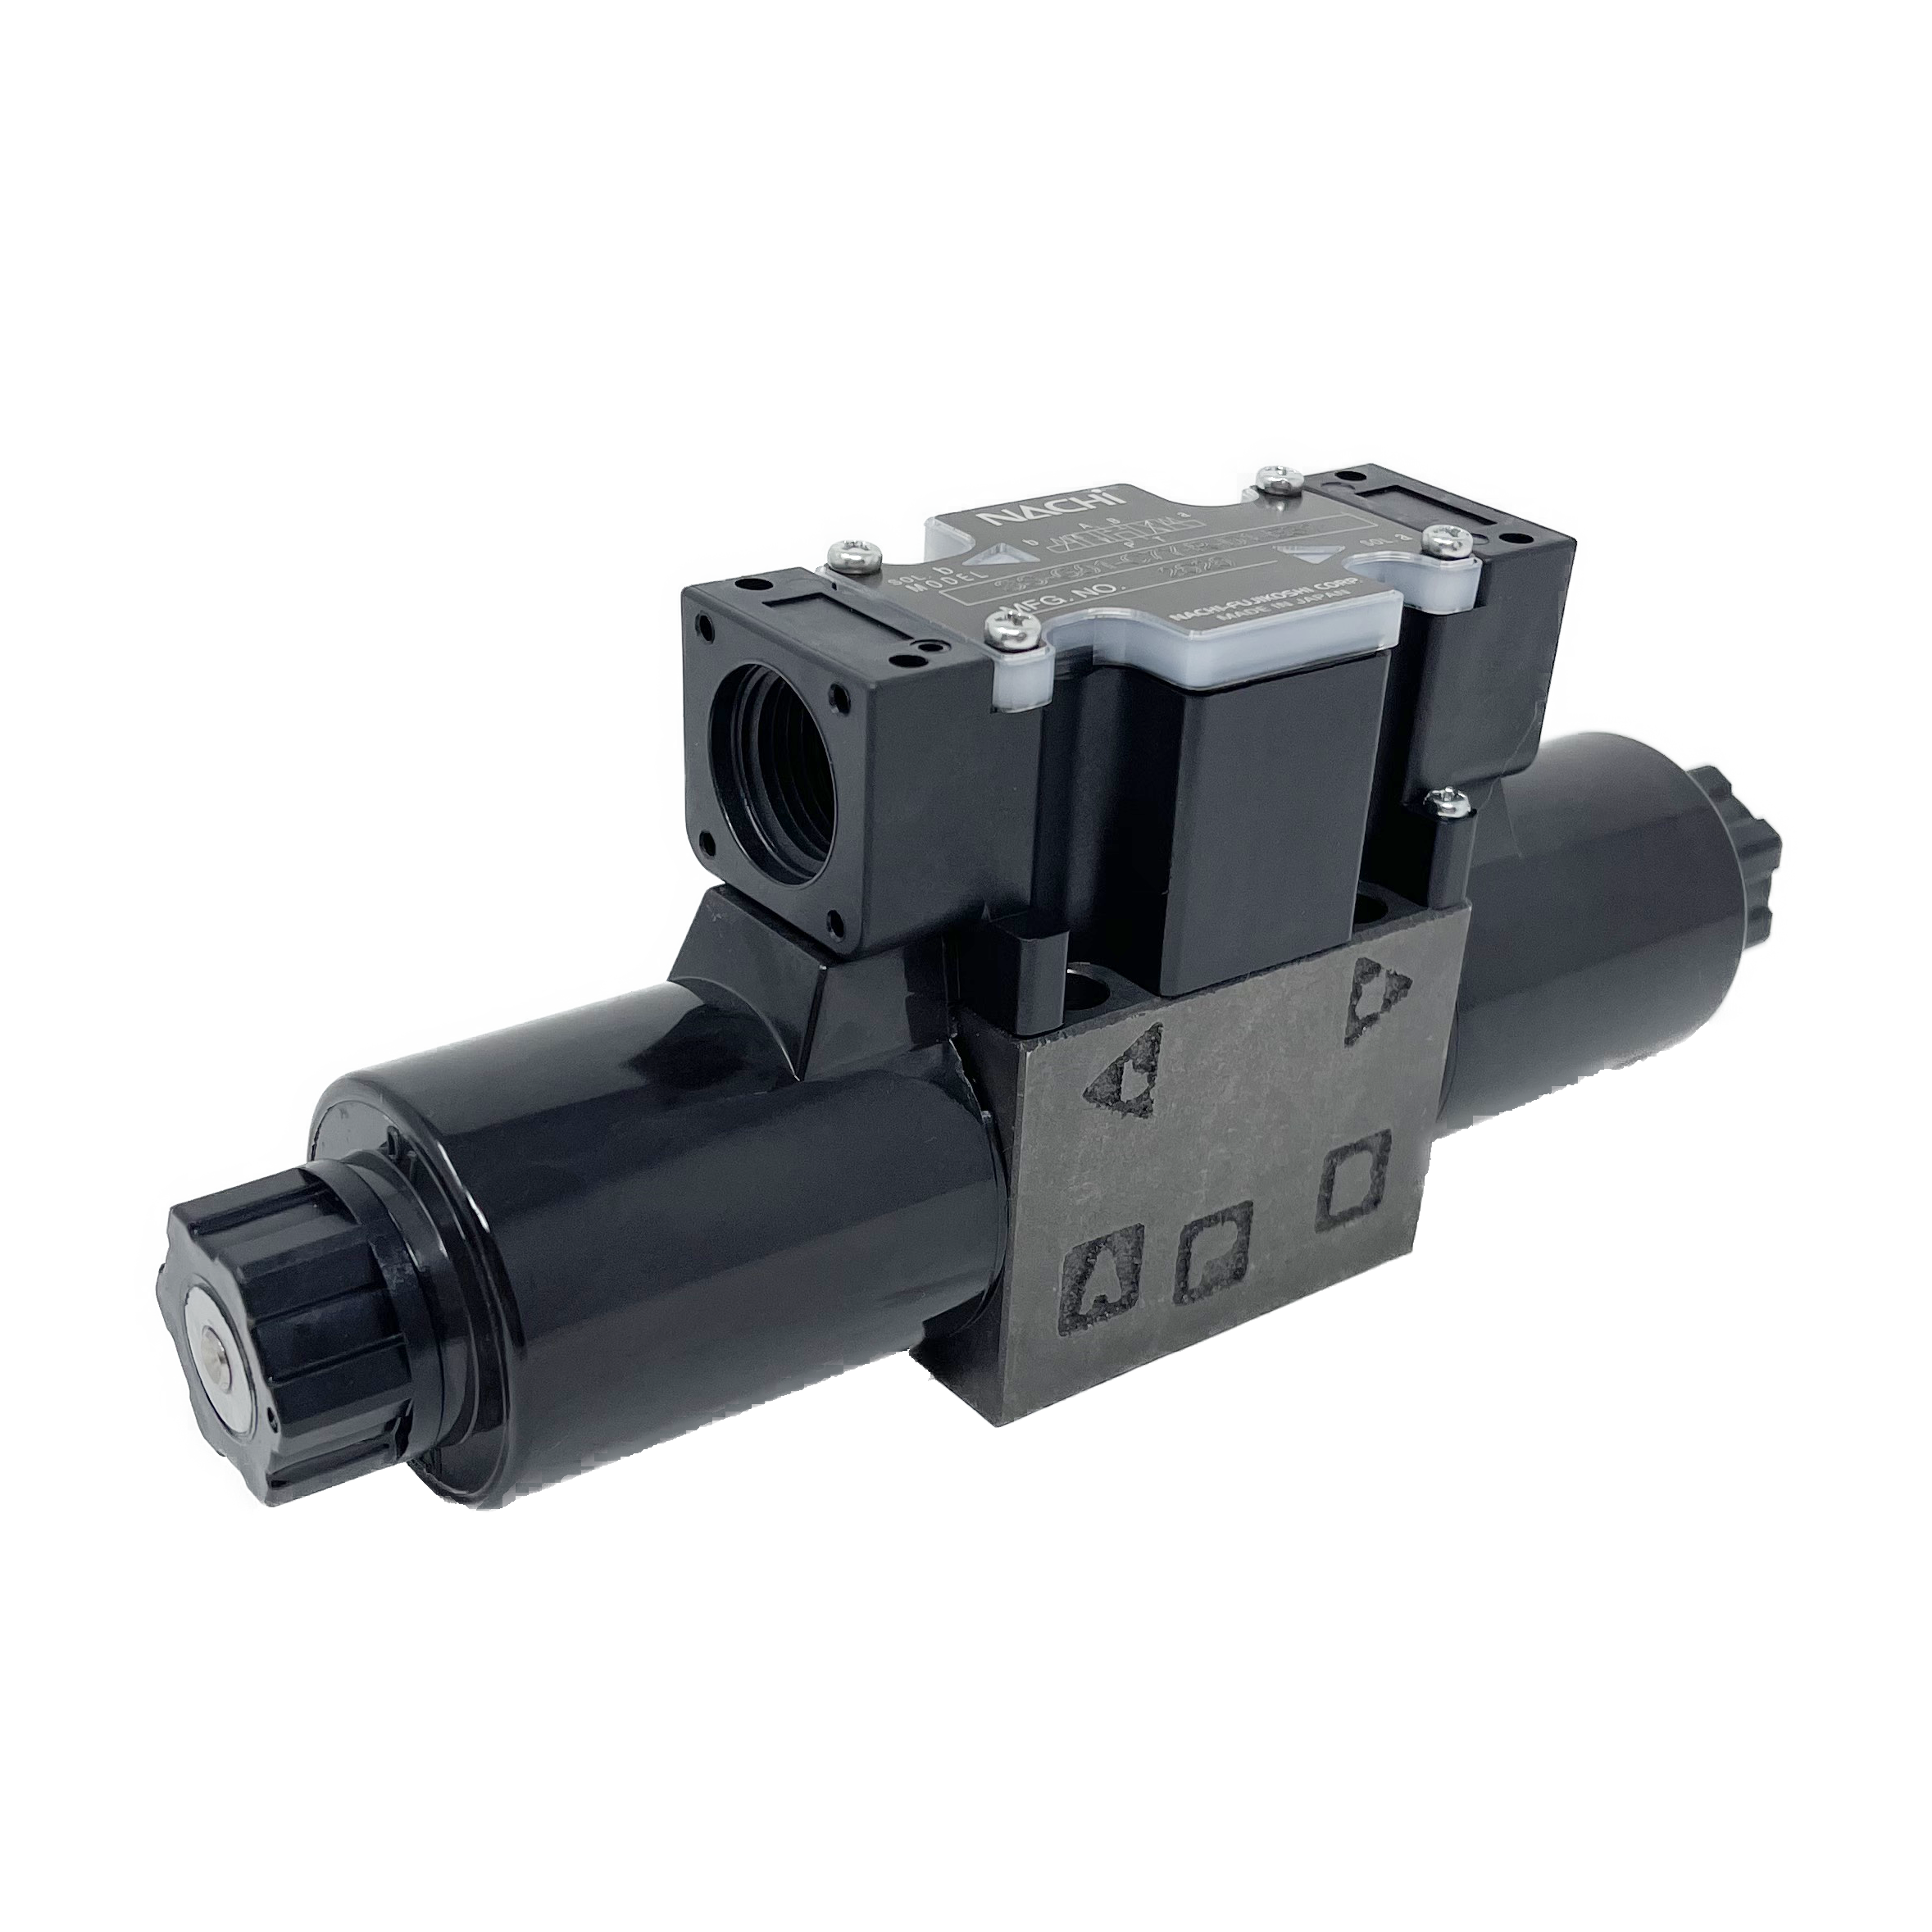 SS-G01-C5-FR-D1-E31 : Nachi Solenoid Valve, 3P4W, D03 (NG6), 26.4GPM, 5075psi, All Ports Blocked Neutral, 12 VDC, Shockless Type, Wiring Box with Lights